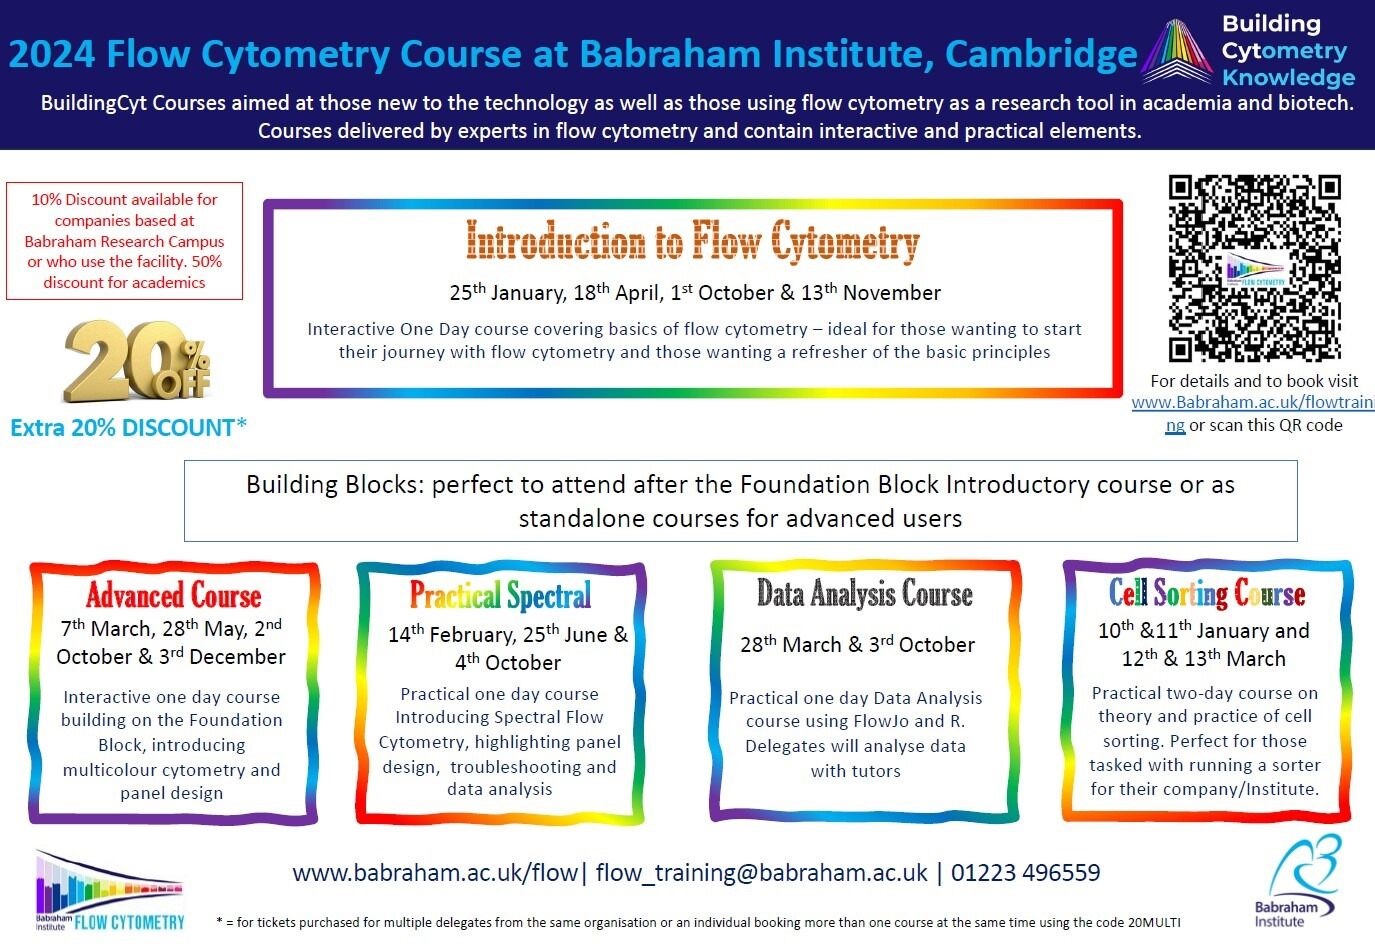 Babraham Institute Flow Cytometry Courses 2024 